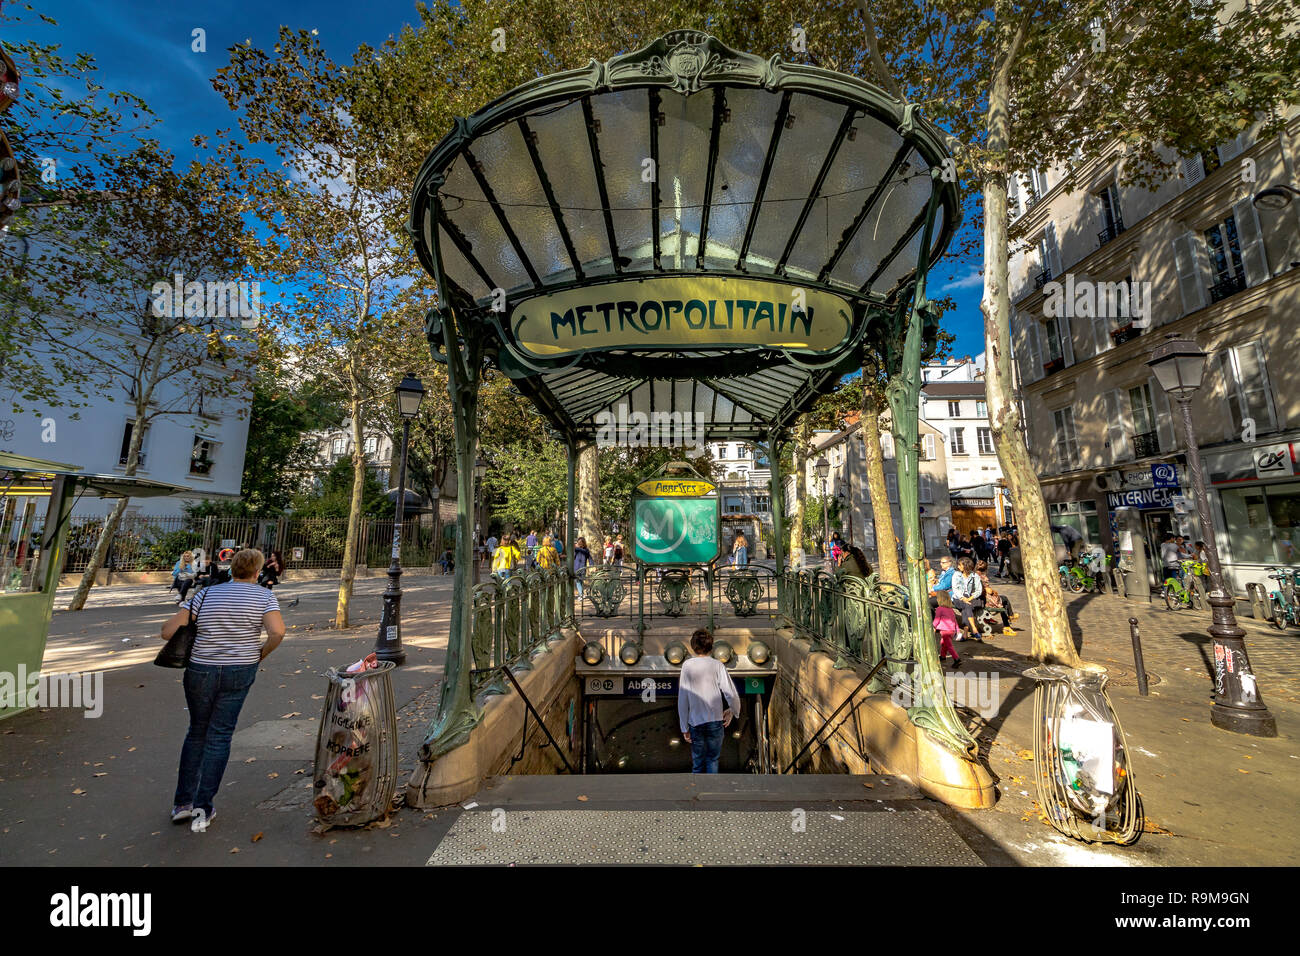 Abbesses Metro Station in Montmartre, Paris, the station's glass covered entrance or édicule was designed by Hector Guimard, Paris, France Stock Photo